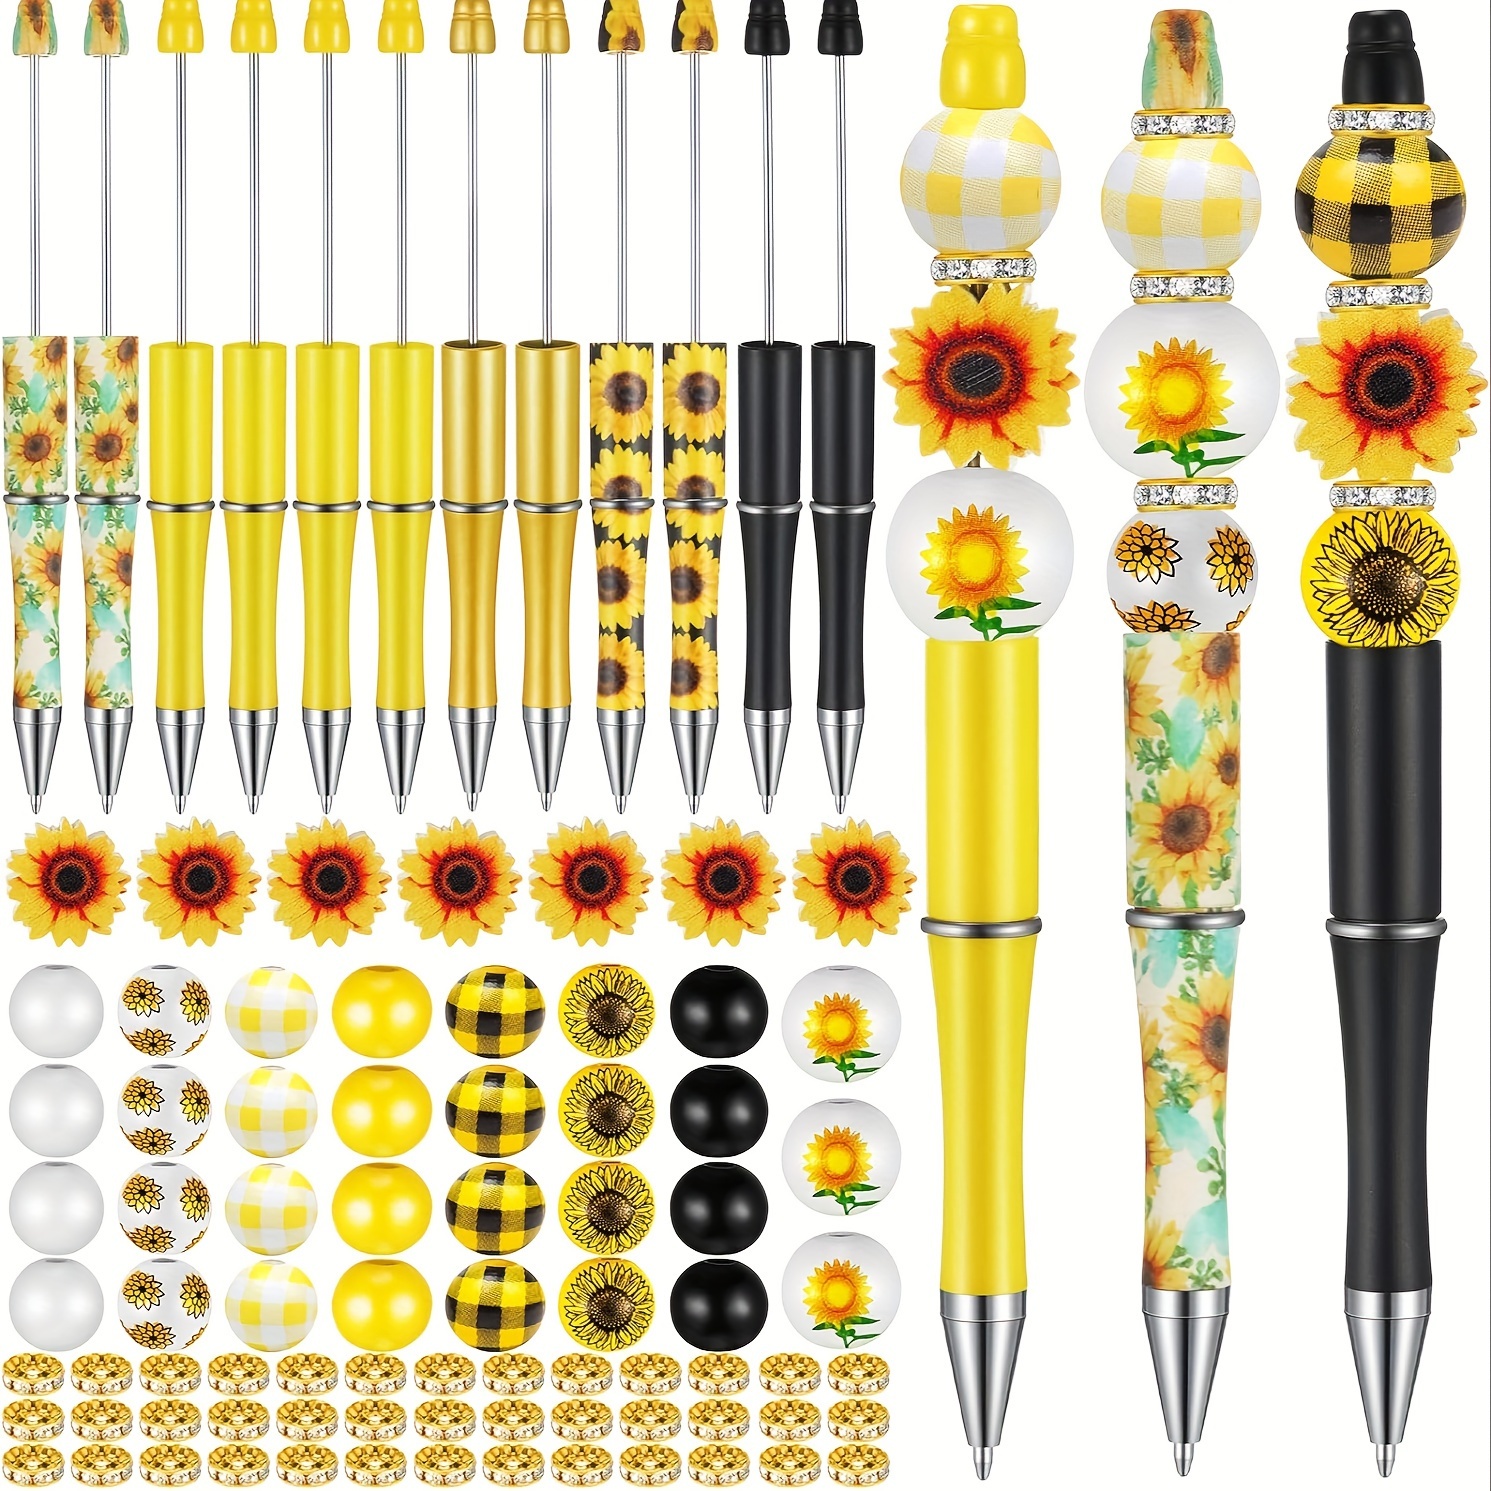 

89-piece Sunflower Beaded Pen Kit - Diy Craft Set With Wooden & Crystal Spacer Beads, Black Ink Pens For Personalized Gifts And School Supplies